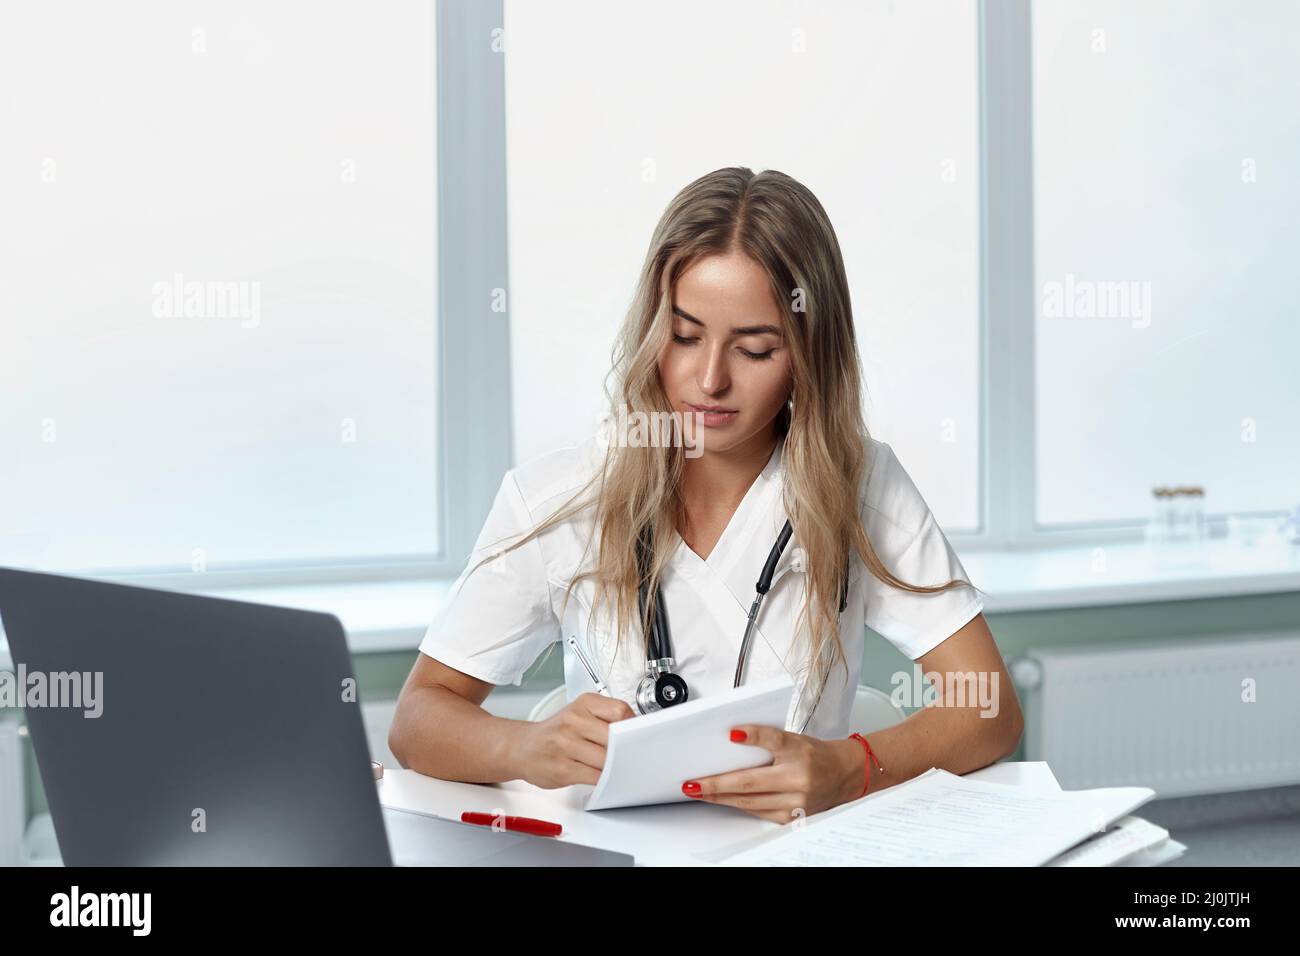 female doctor using laptop and writing notes in medical journal sitting at desk. Stock Photo